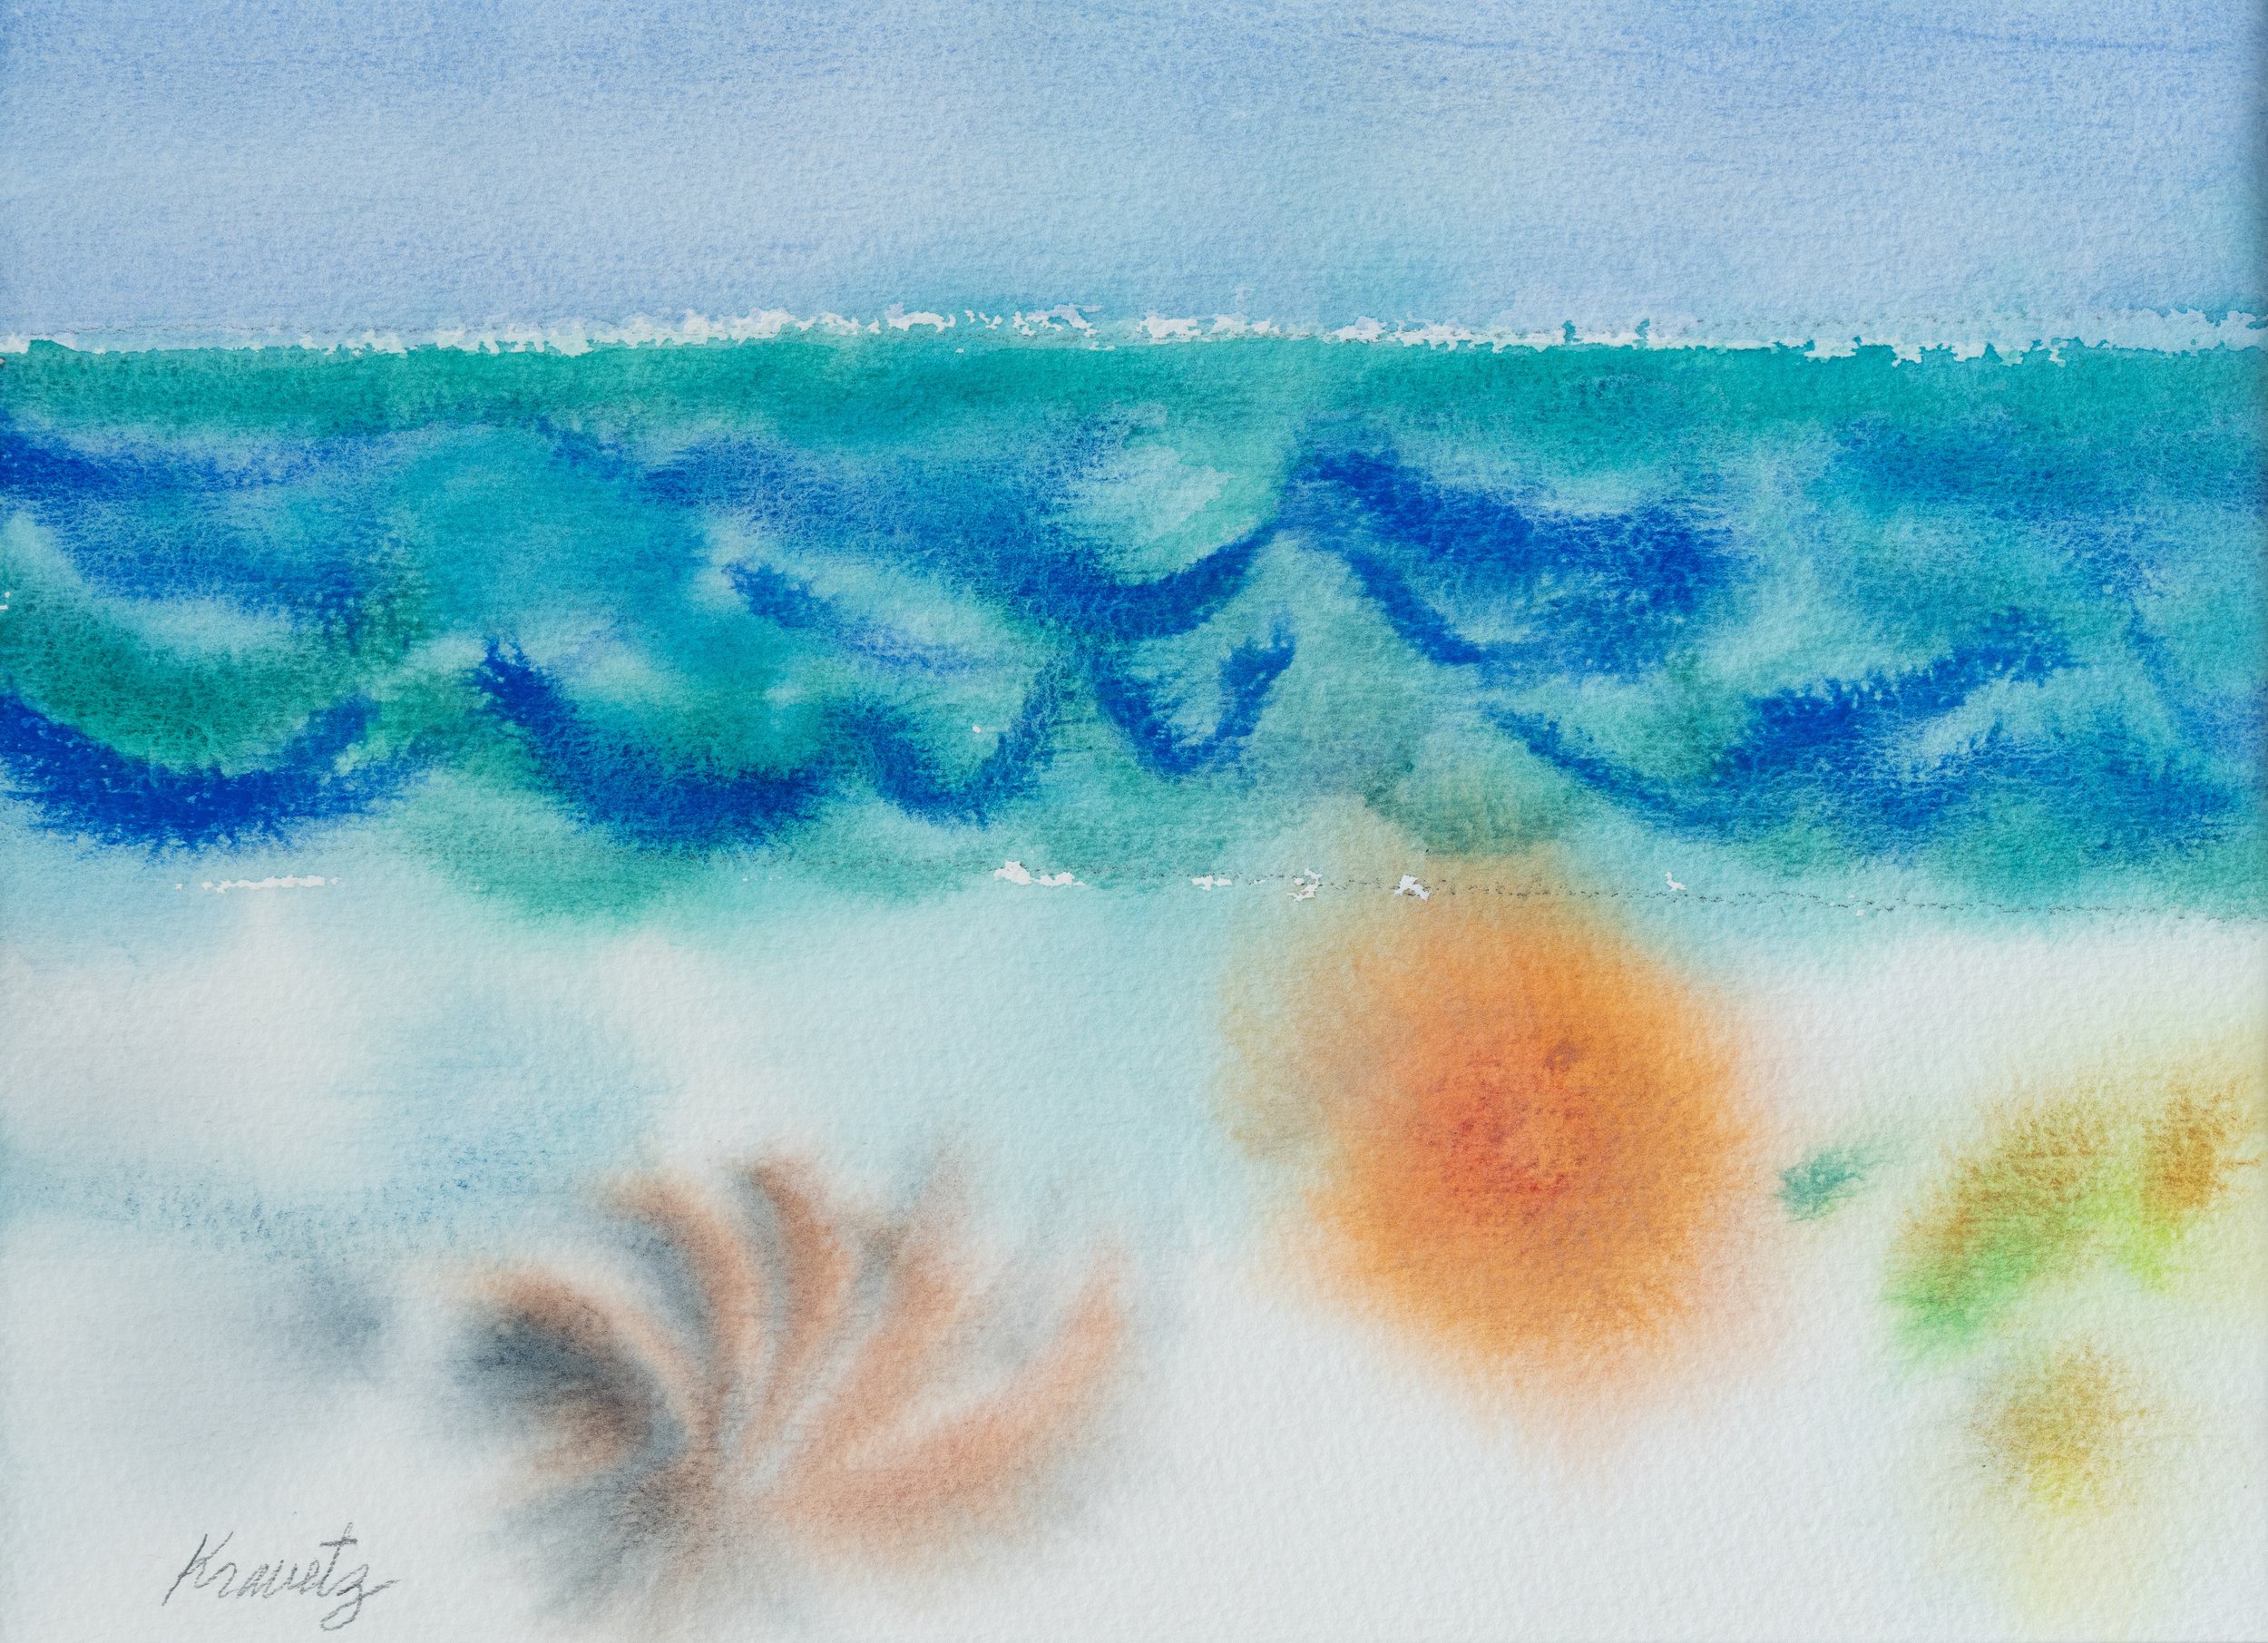 Sea Treasures, 1989, watercolor, 16x20 inches with mat